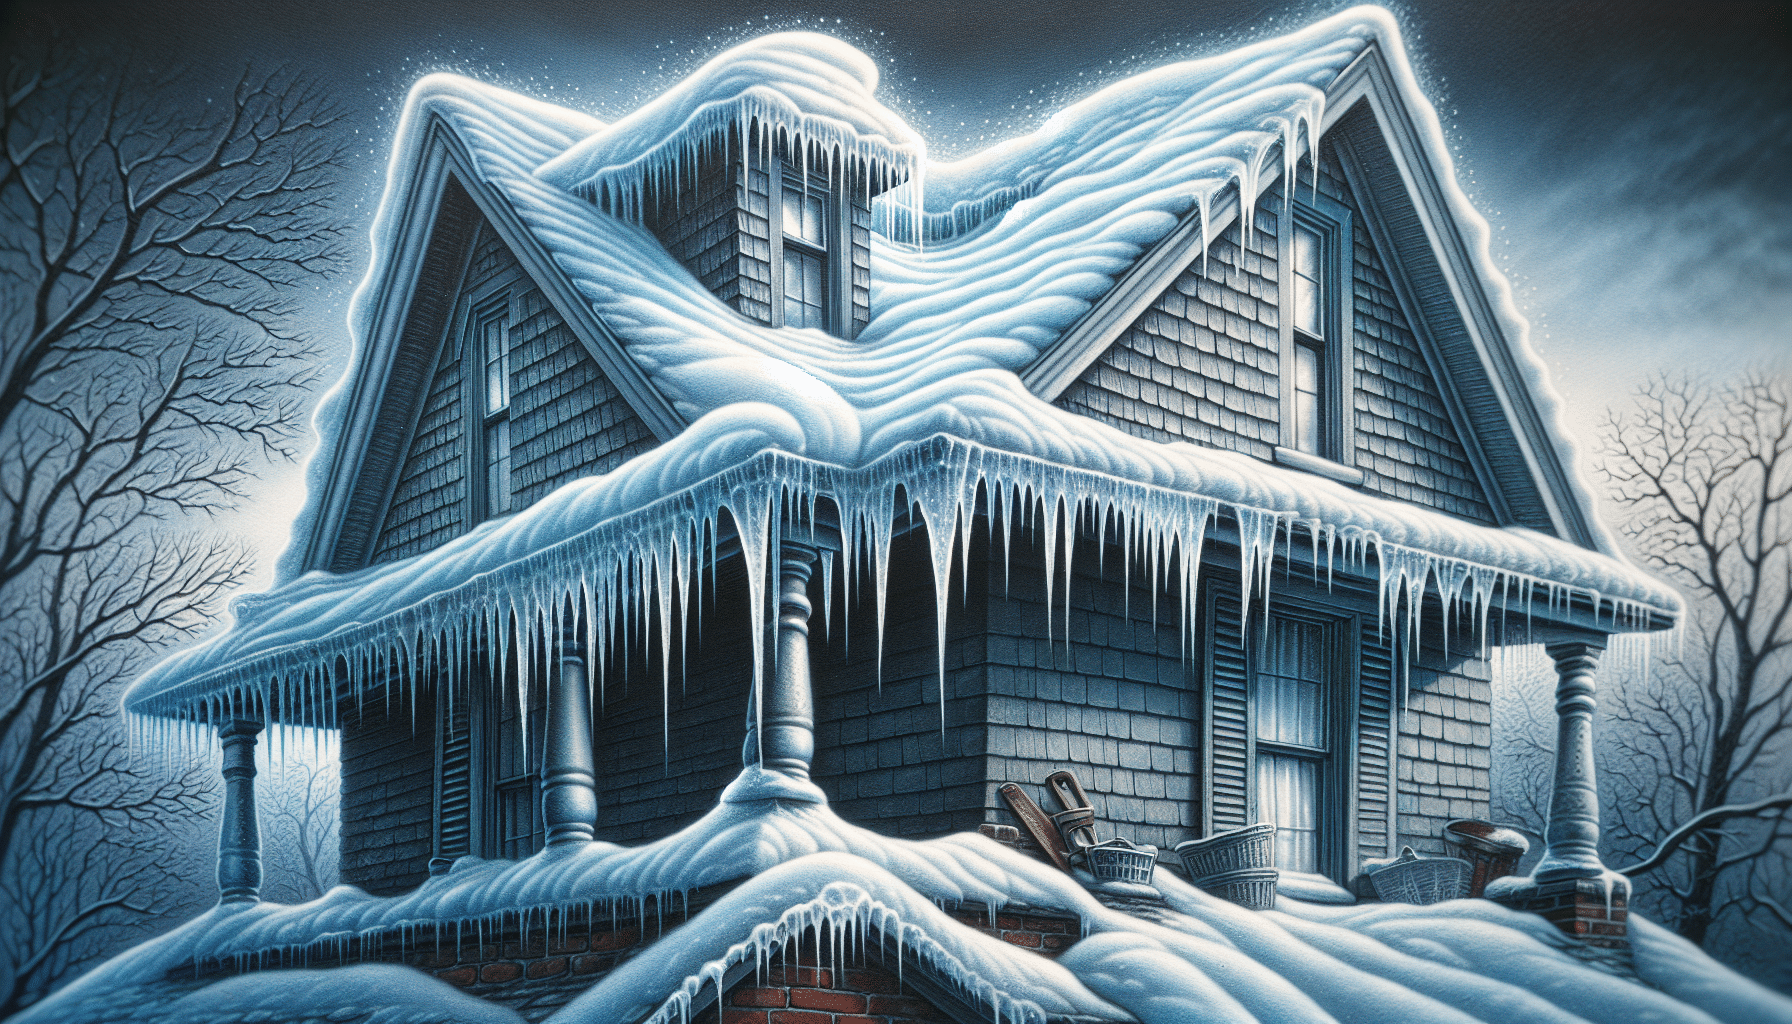 Ice dams and freezing temperatures affecting roofs